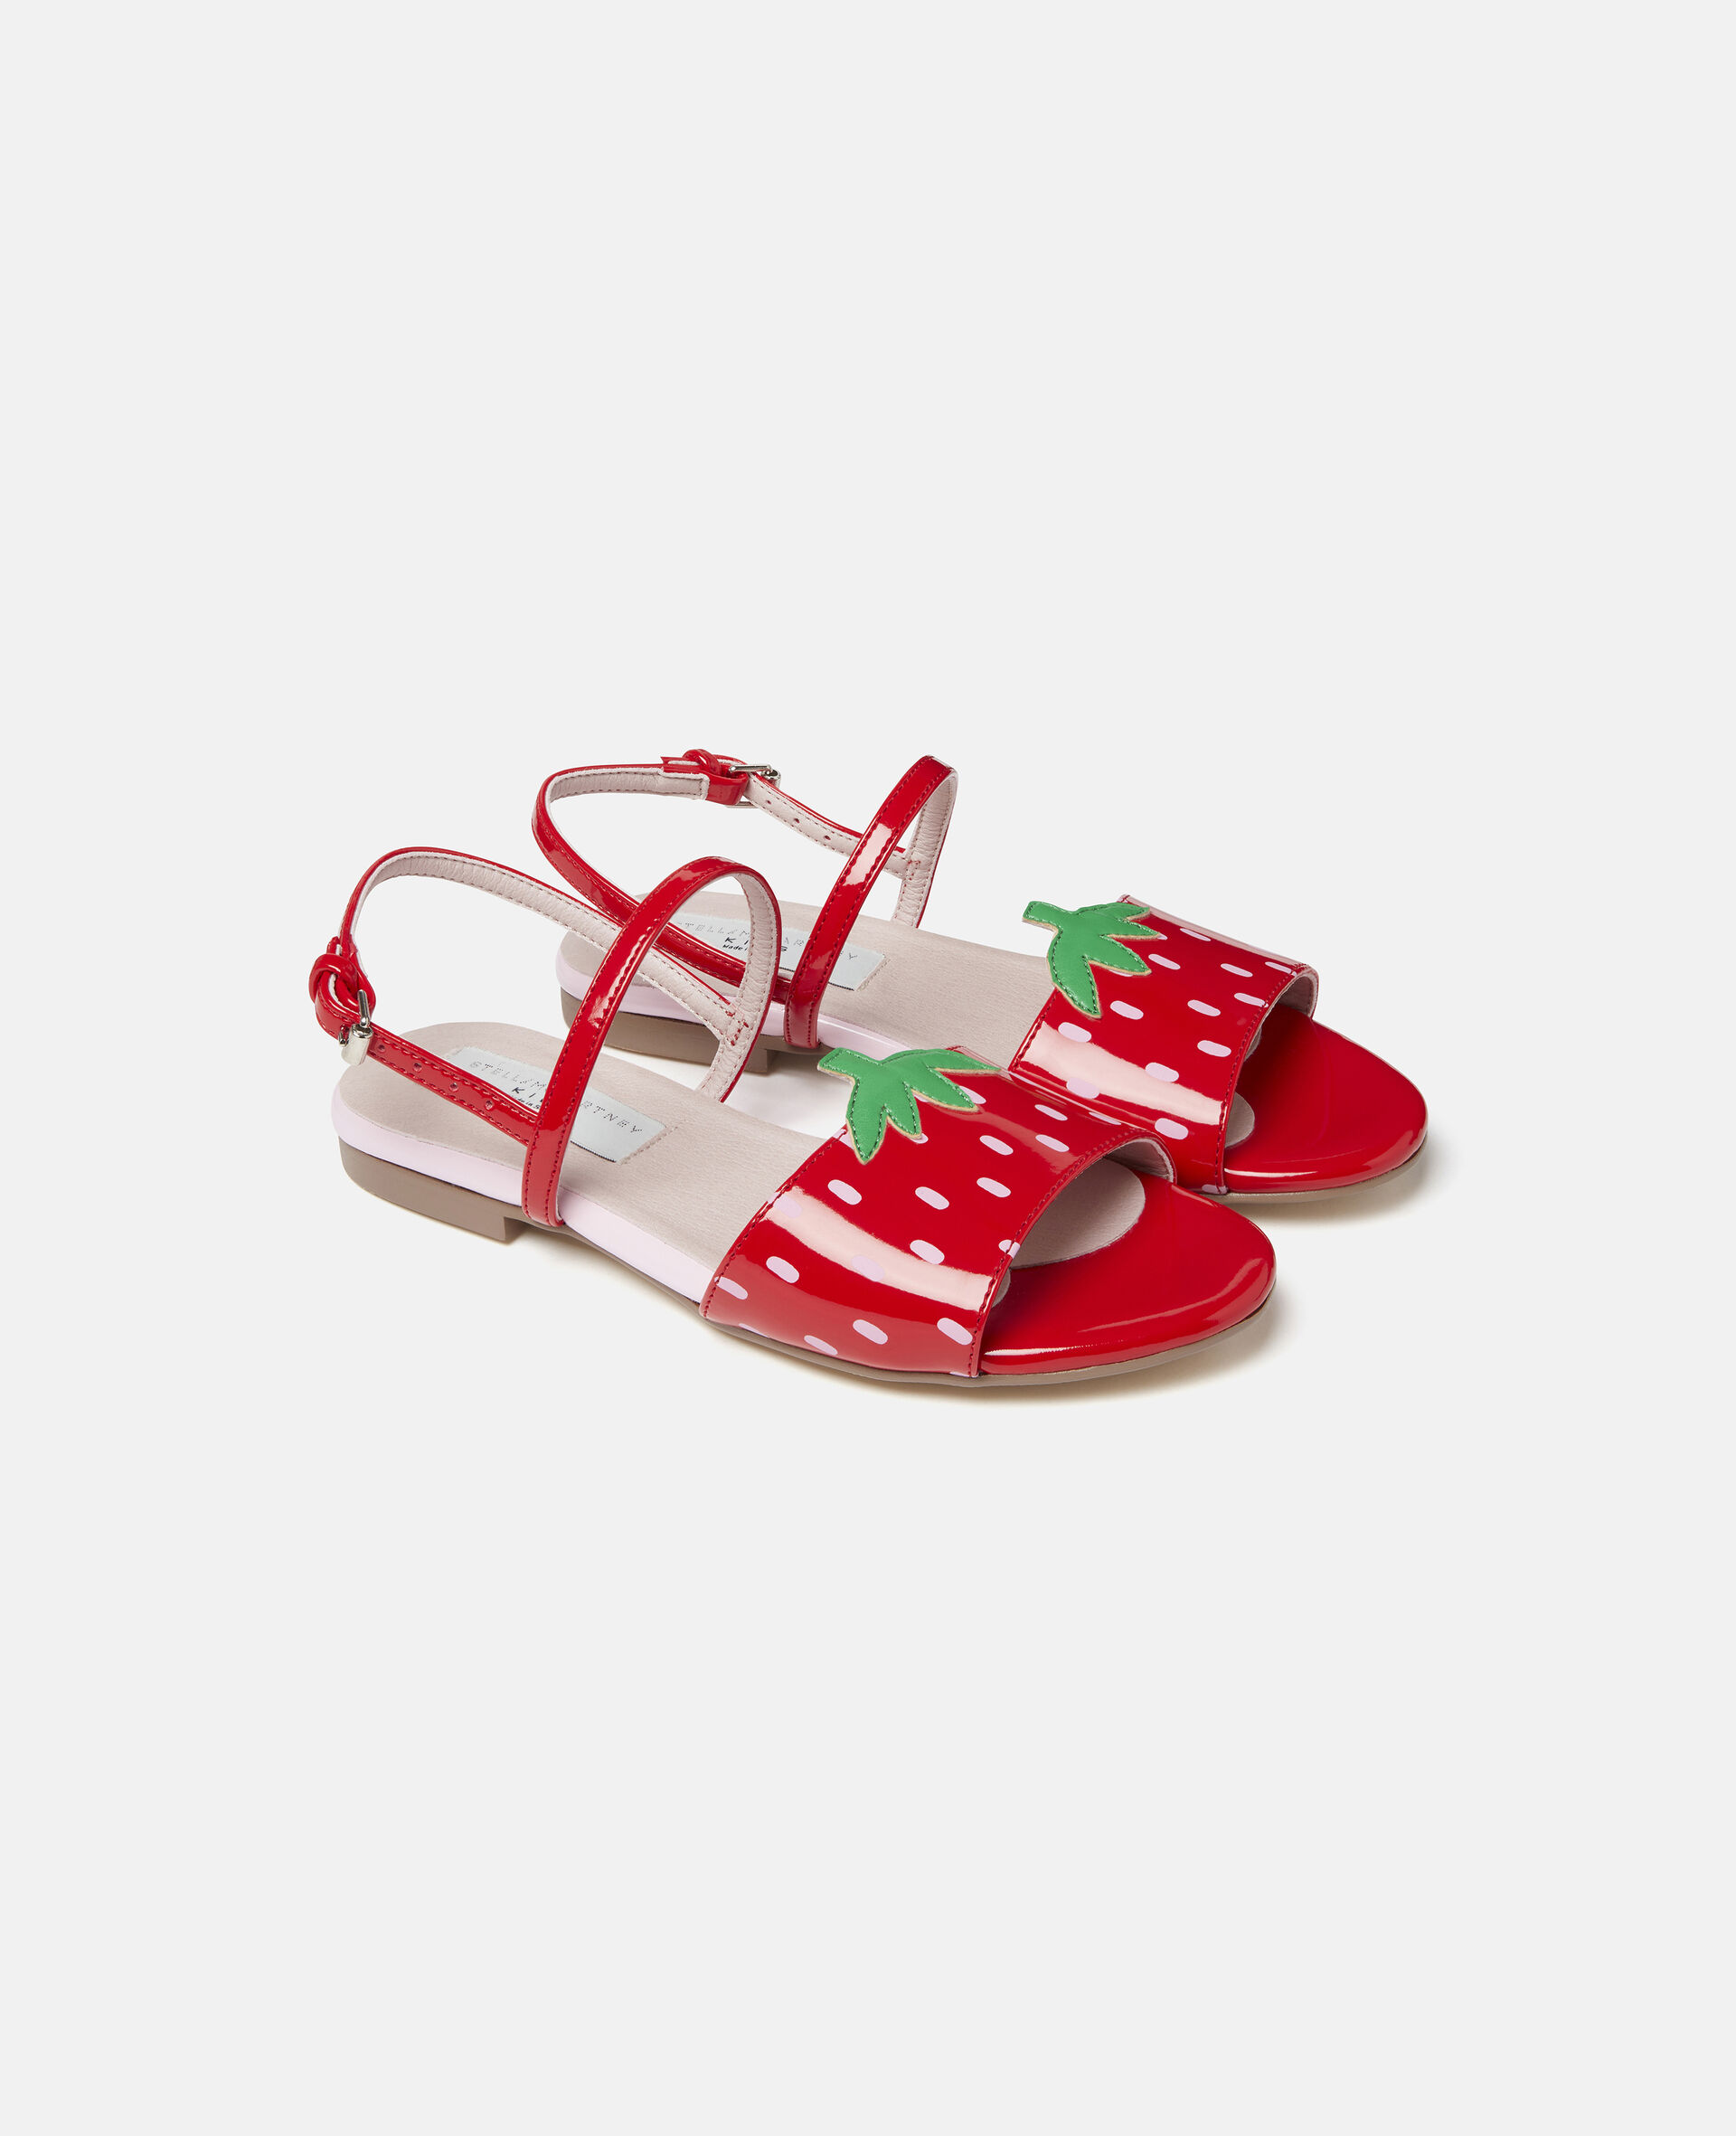 Strawberry Alter Mat Sandals-Red-large image number 3